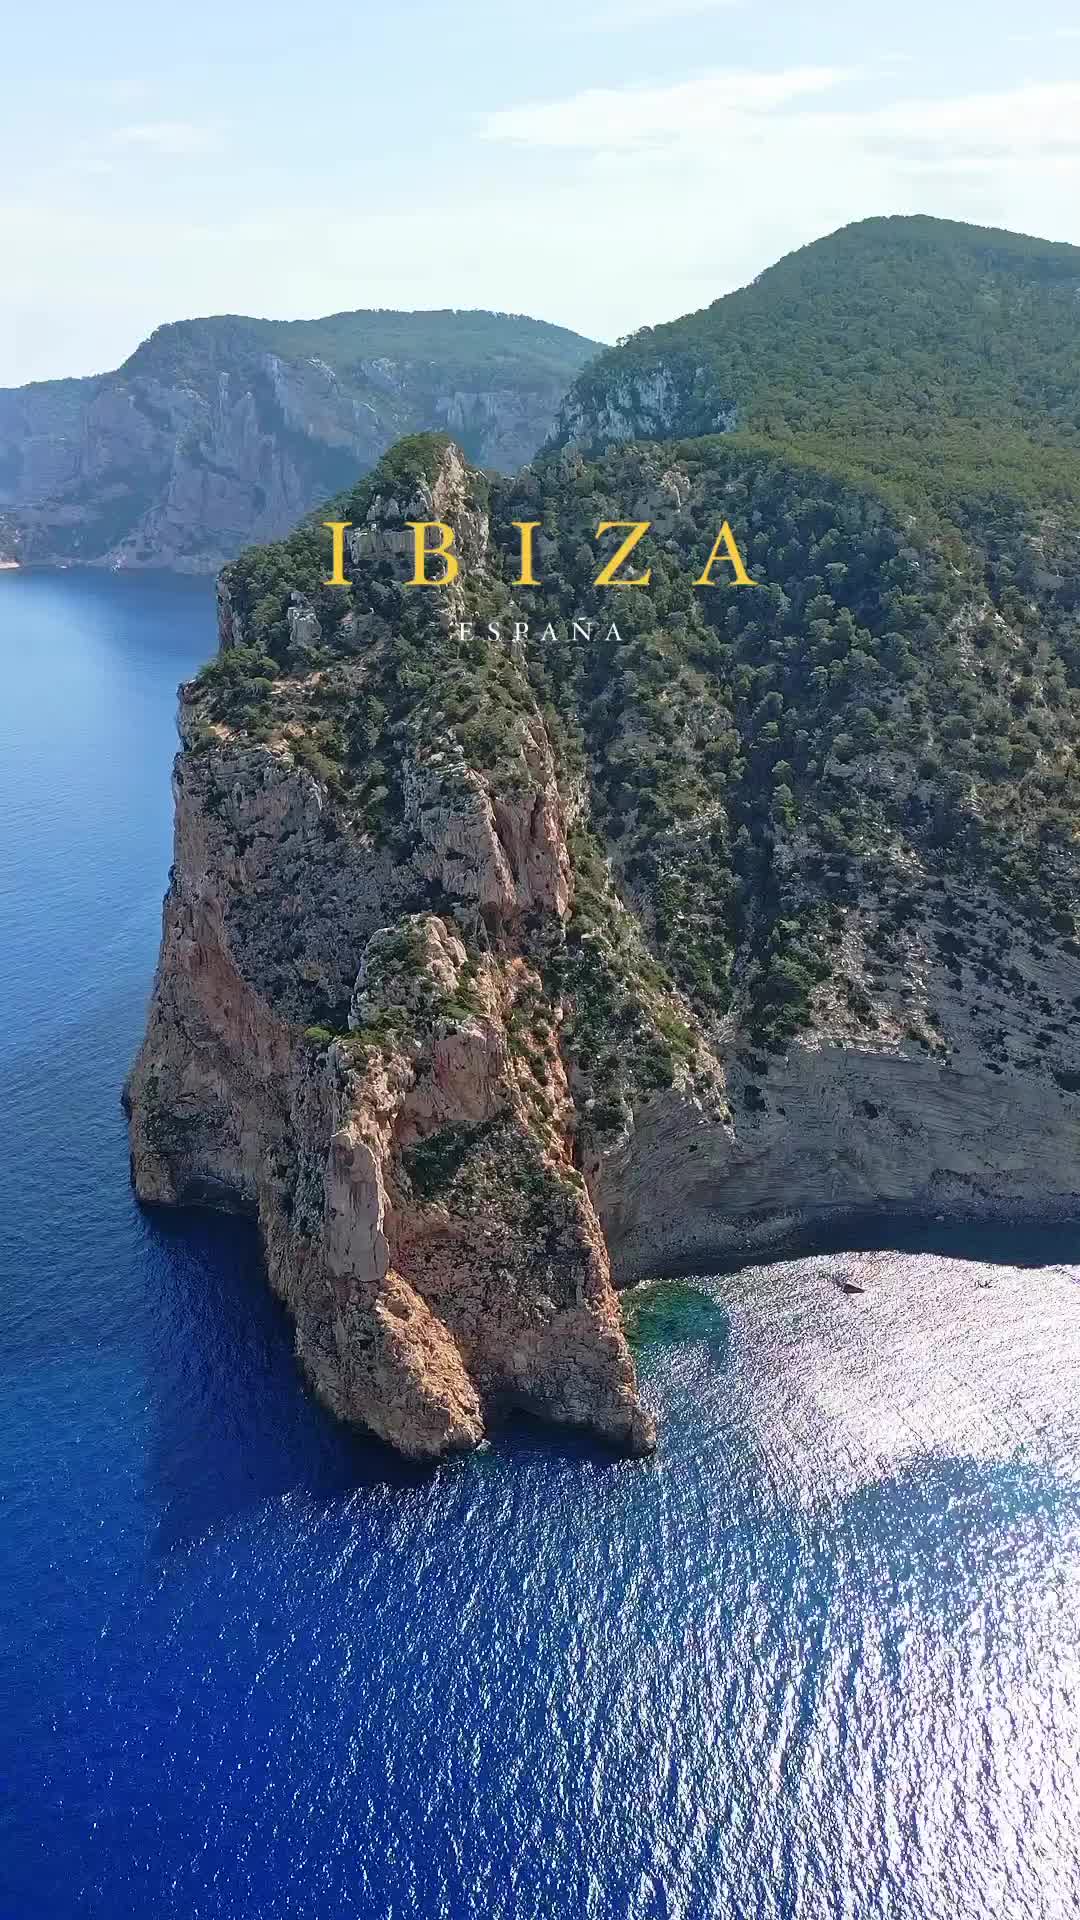 ☀️🌊 Ibiza is a paradise that never ceases to amaze me! I recently went on a road trip around the island and discovered some truly breathtaking spots. Here are a few of my favorites:

1️⃣ Cala Bassa: This stunning beach is a must-visit for any traveler to Ibiza. With crystal-clear waters and soft sand, it’s the perfect place to soak up the sun and enjoy the Mediterranean sea.

2️⃣ Torre d’en Rovira: This ancient watchtower offers panoramic views of the sea and the surrounding landscape. It’s a great spot to take in the beauty of Ibiza and learn about its fascinating history.

3️⃣ Las Puertas del Cielo: Also known as “The Gates of Heaven,” this natural rock formation is a truly magical place. The turquoise waters and dramatic cliffs create a stunning contrast that’s sure to take your breath away.

4️⃣ Cala Conte: This idyllic cove is a true gem of Ibiza, with crystal-clear waters and a peaceful atmosphere. It’s the perfect spot to unwind and soak up the beauty of the island.

And when it comes to dining, there’s no better place than @silladesbosc. This charming restaurant is located right next to the beach, and offers delicious Mediterranean cuisine with a modern twist.

Ibiza truly is a magical place, and I can’t wait to go back and explore more of its wonders. 

—

📌Location: Ibiza, Spain
🎨 Color graded with: Da Vinci Resolve Studio 

—

#ibiza #esvedra #ibizaworkers #ibizaisland #esvedraibiza #eivissa #ibizalovers #ibizabeach #iloveibiza #esvedrarock #ibizastyle #ibizamagicisland #ibizaesvedra #sunset #spain #ibiza🍒 #ibz #esvedráibiza #baleares #islasbaleares #balearicislands #formentera #españa #balears #illesbalears #igersbalears #visitspain #mallorca #formenteralovers #ibizalife